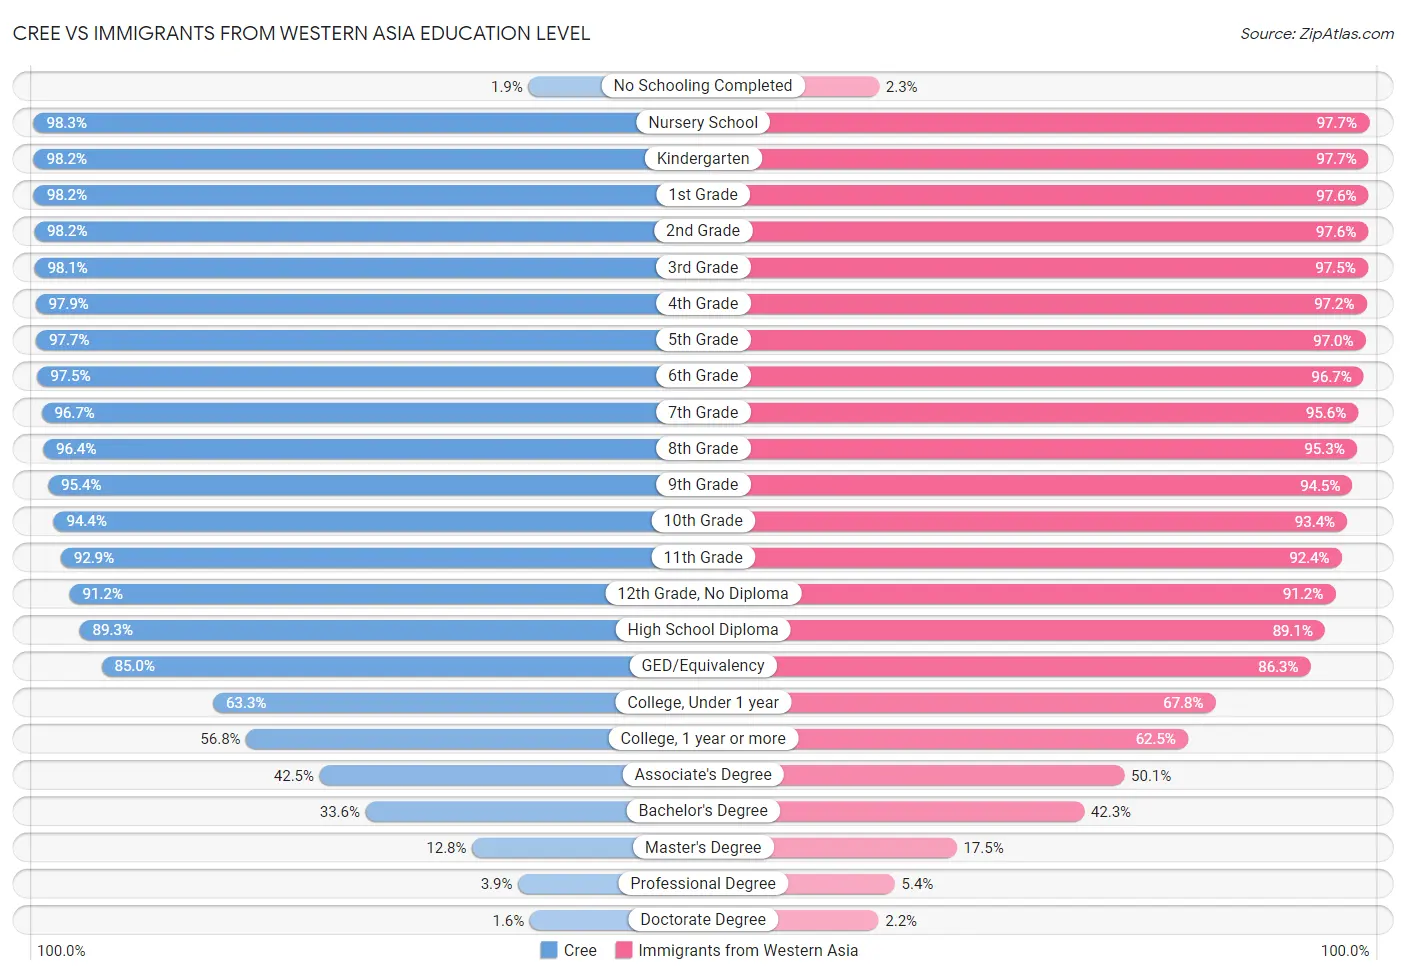 Cree vs Immigrants from Western Asia Education Level